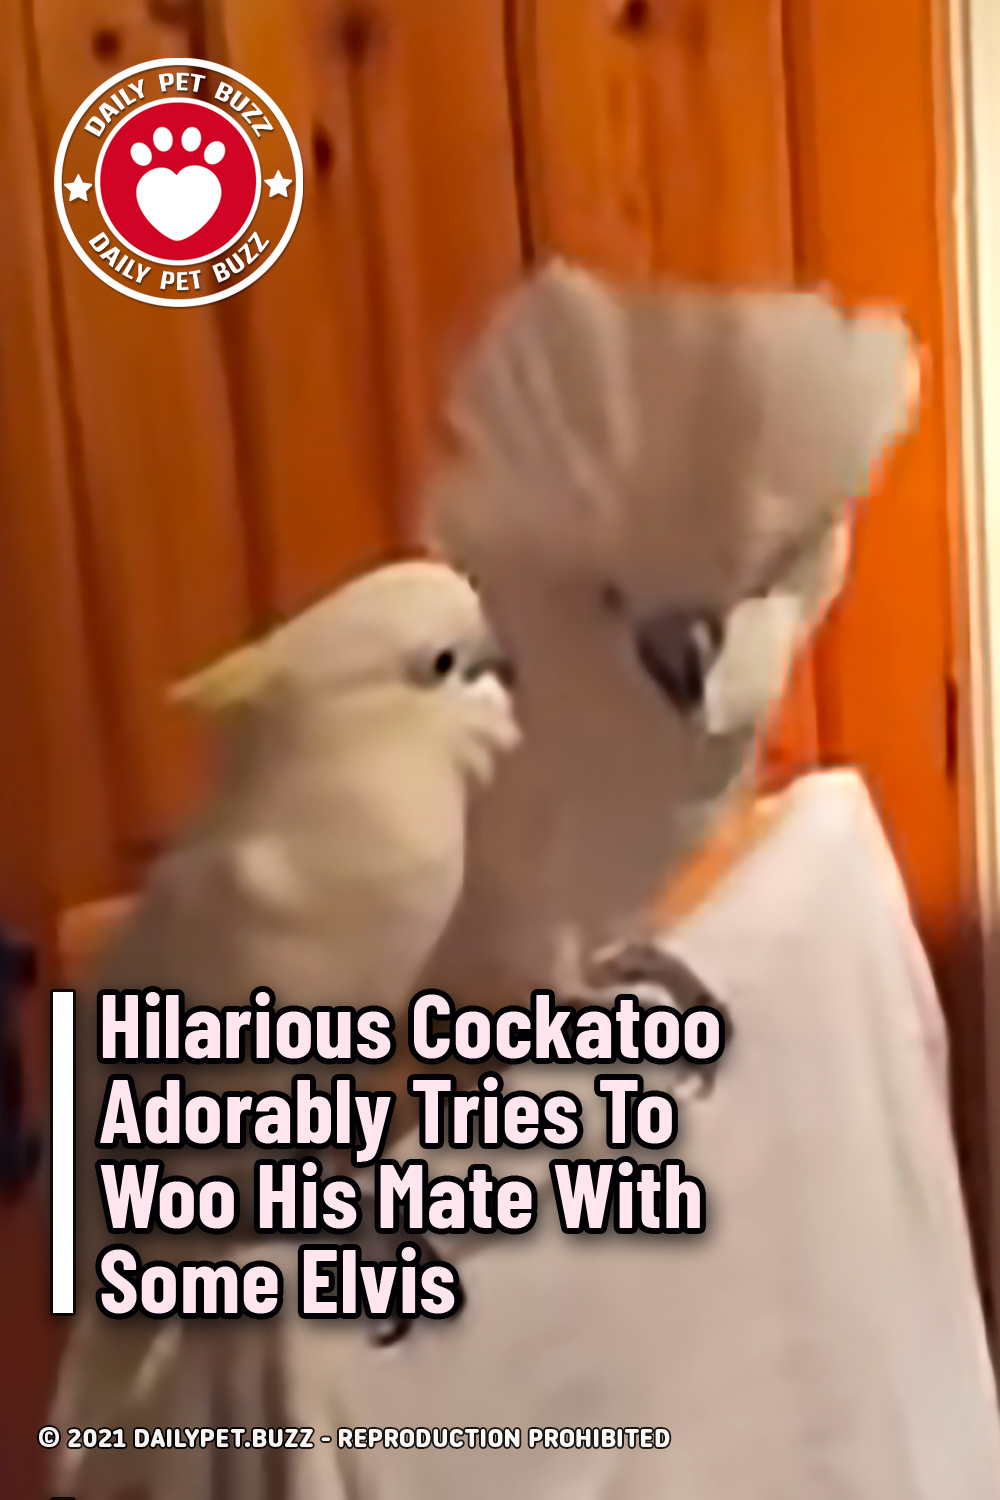 Hilarious Cockatoo Adorably Tries To Woo His Mate With Some Elvis